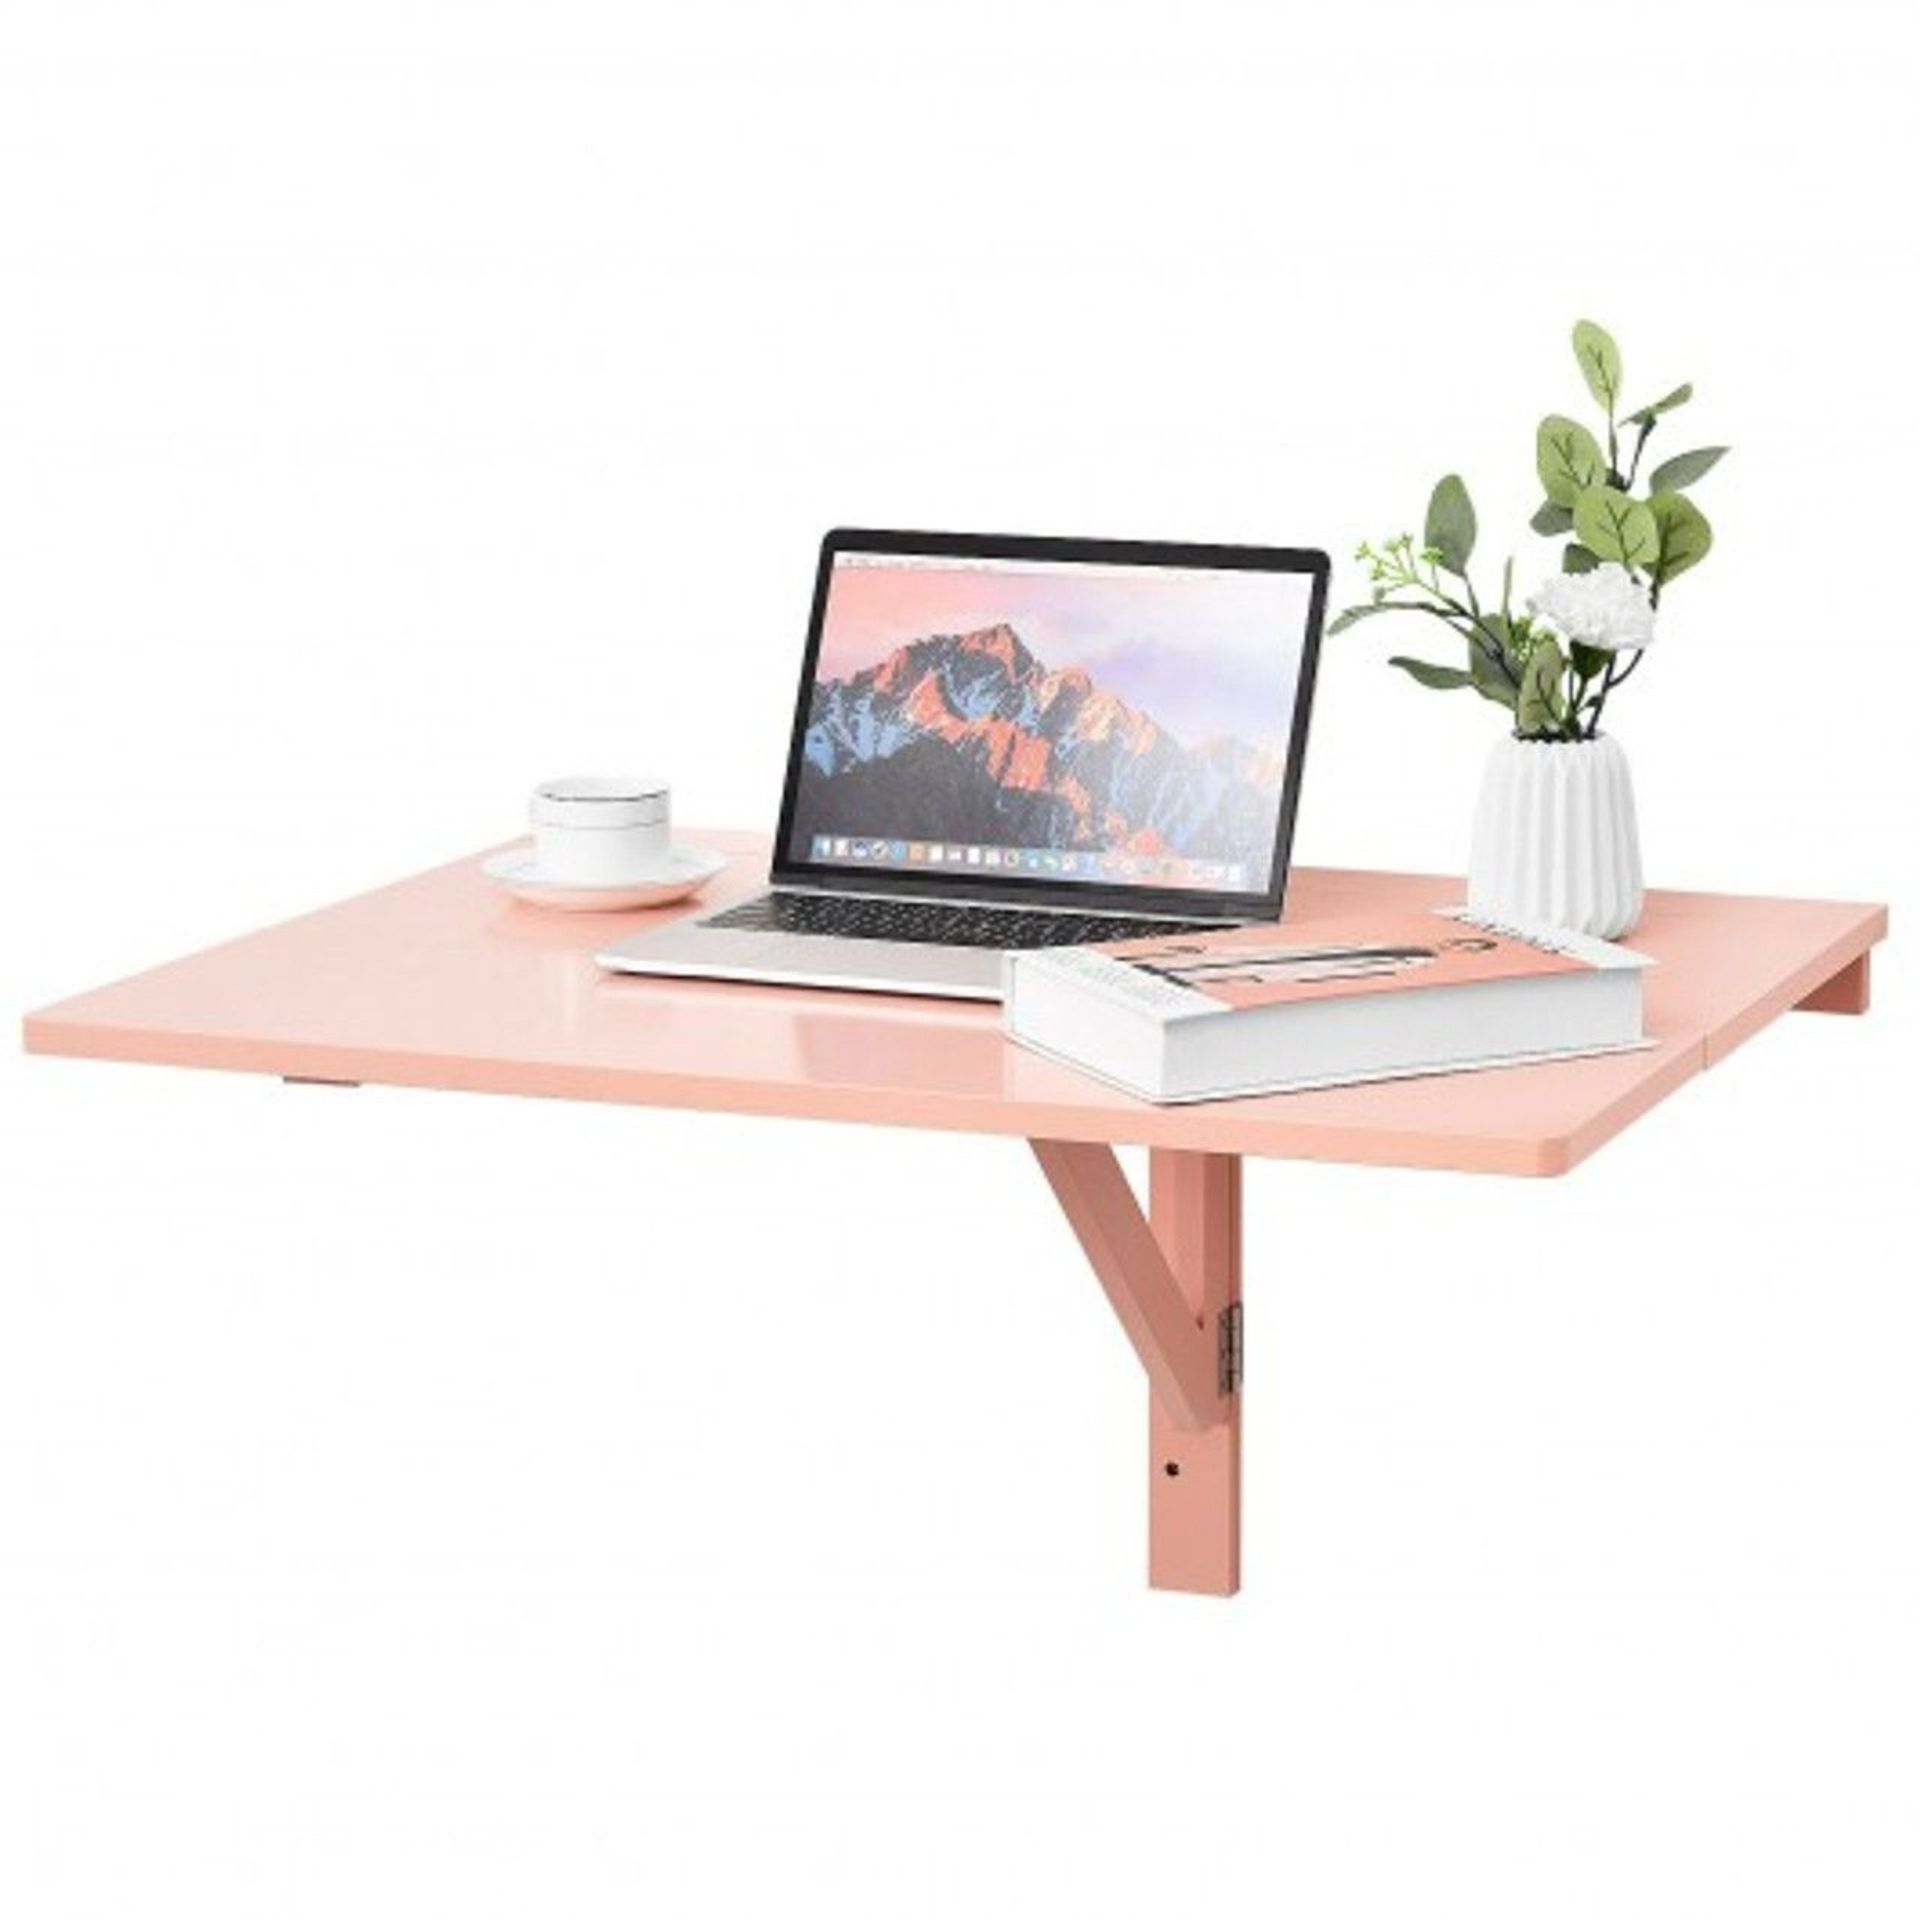 Space Saver Folding Wall-Mounted Drop-Leaf Table-Pink. - ER53.